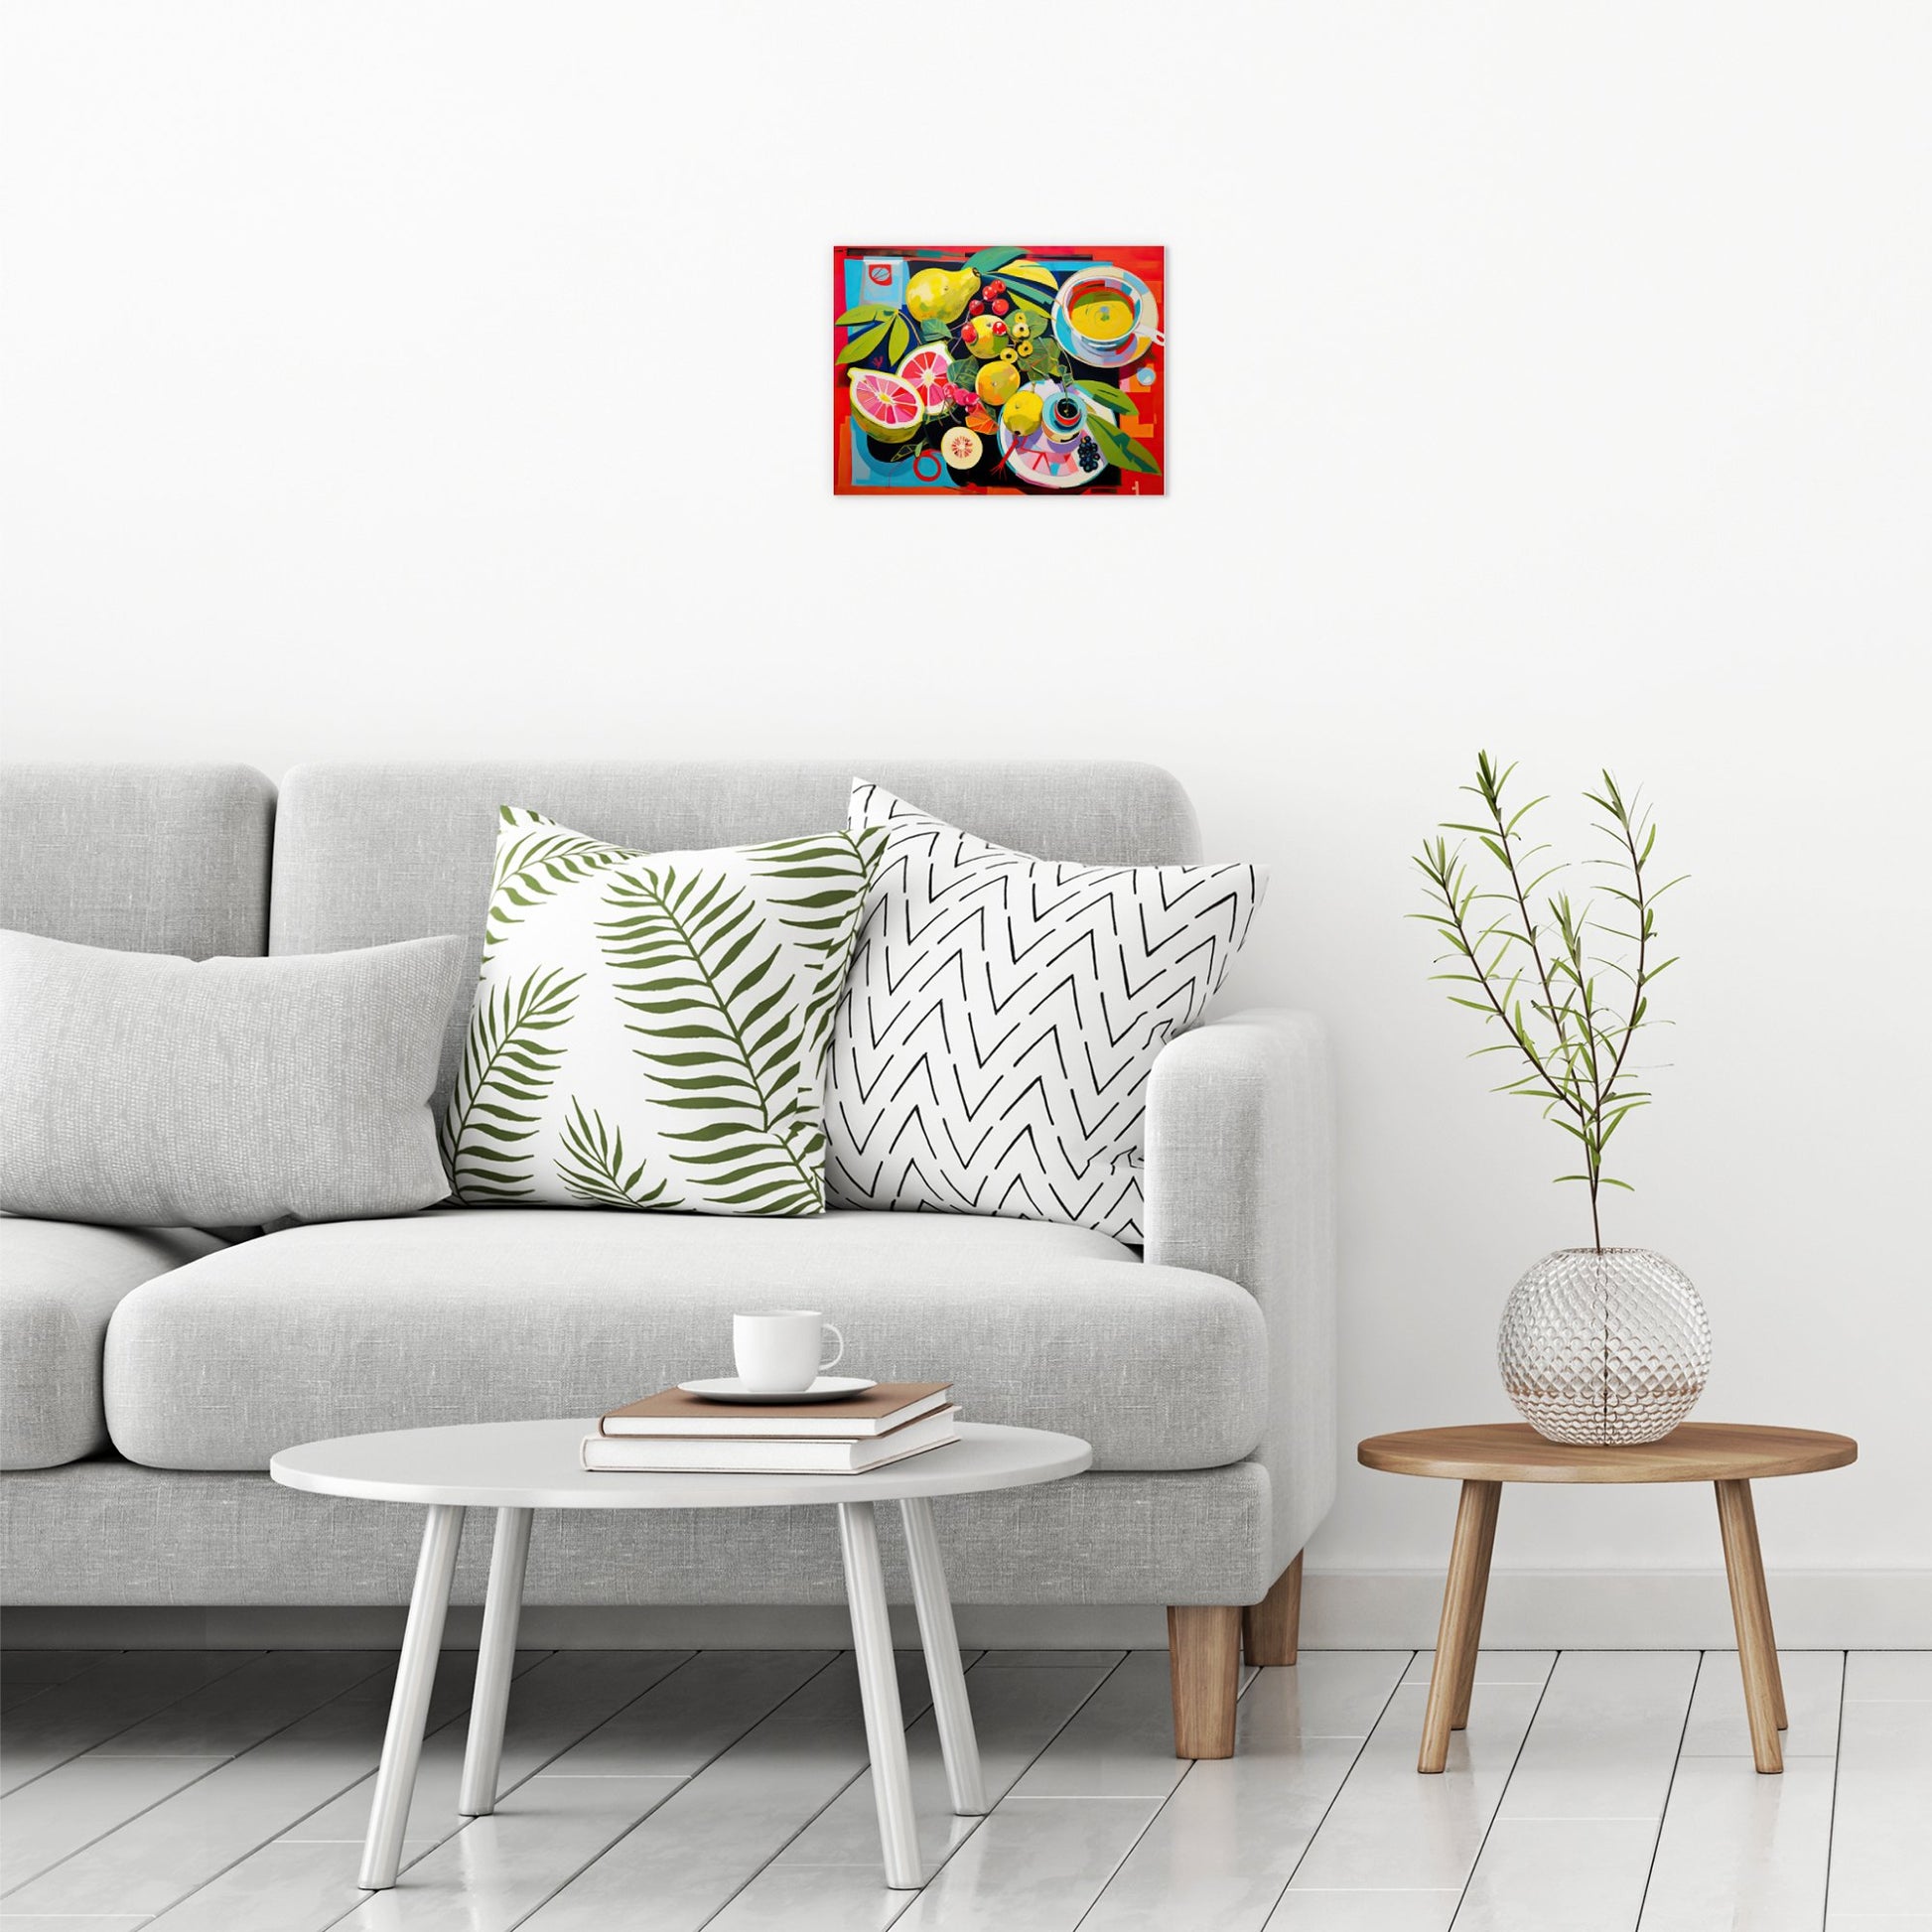 A contemporary modern room view showing a small size metal art poster display plate with printed design of a Still Life with Fruit Painting